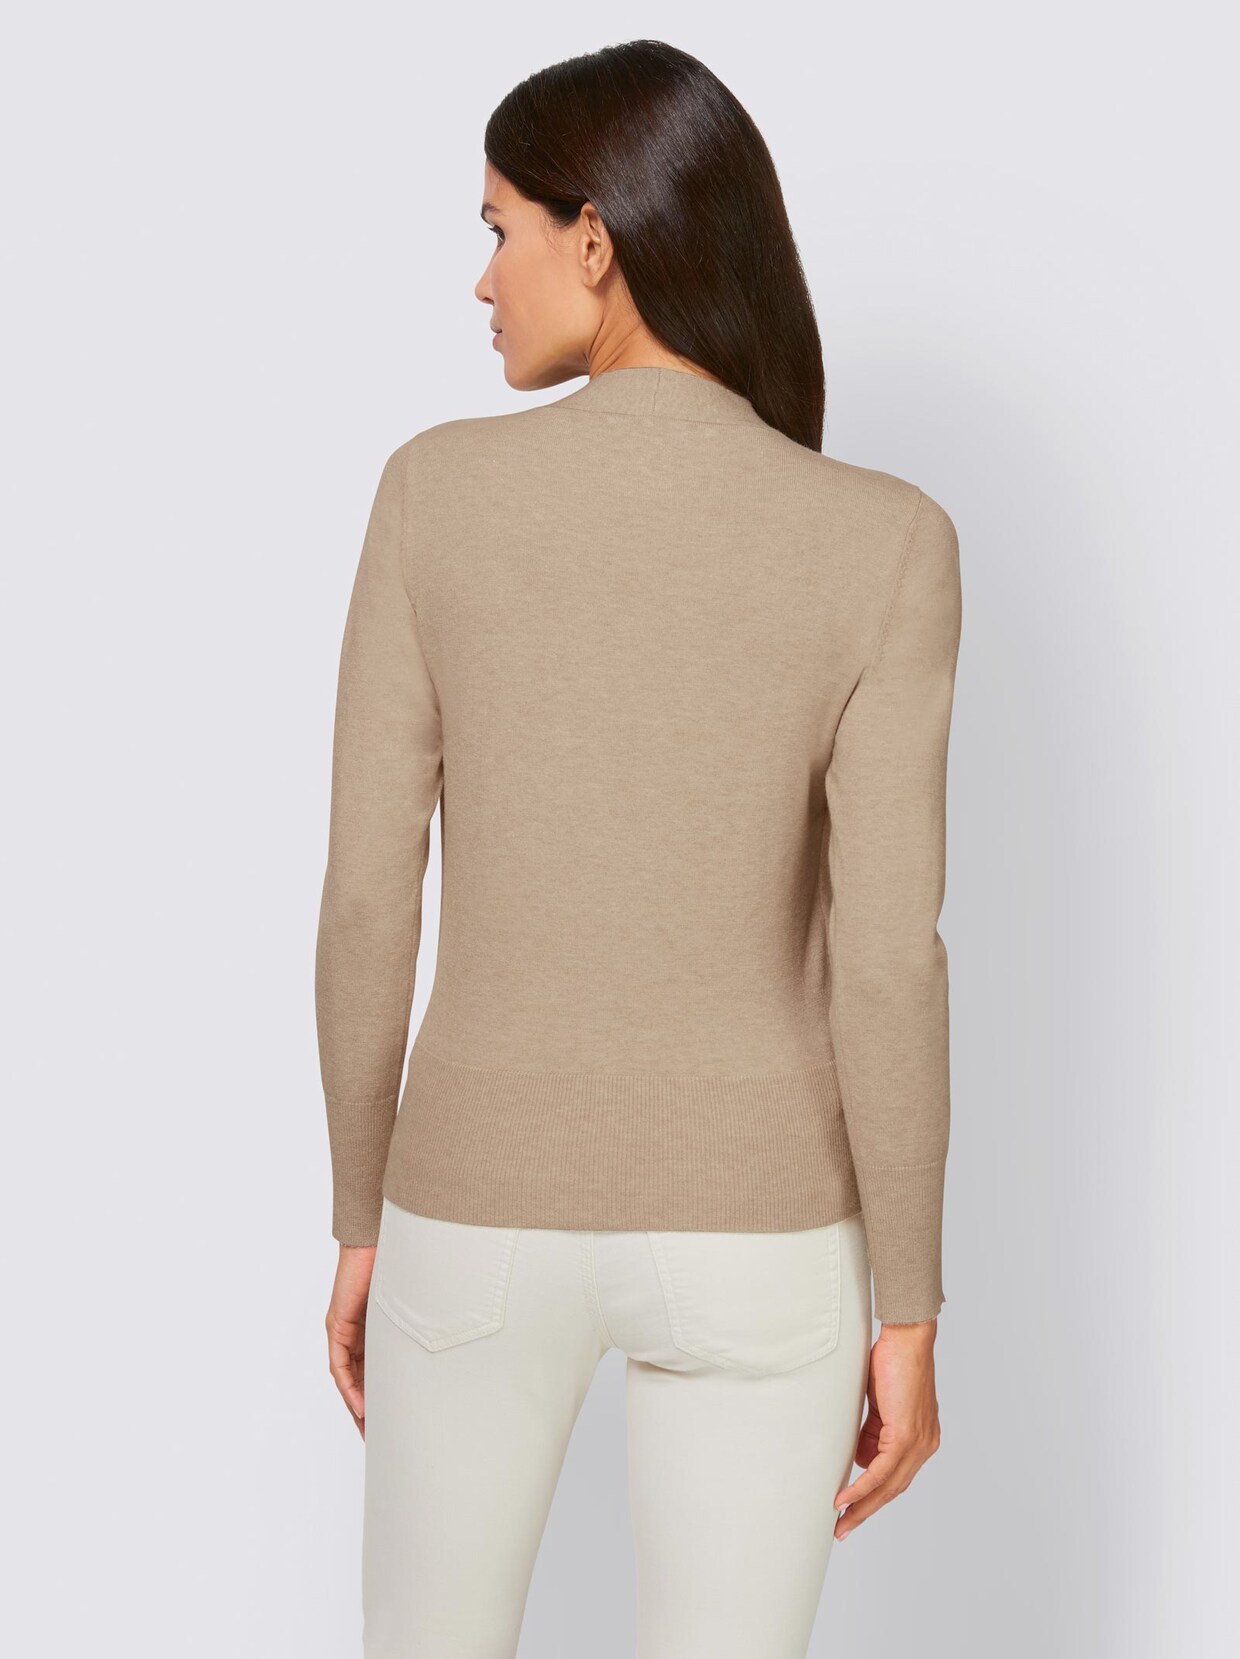 Ashley Brooke 2-in-1-Pullover - sand-meliert